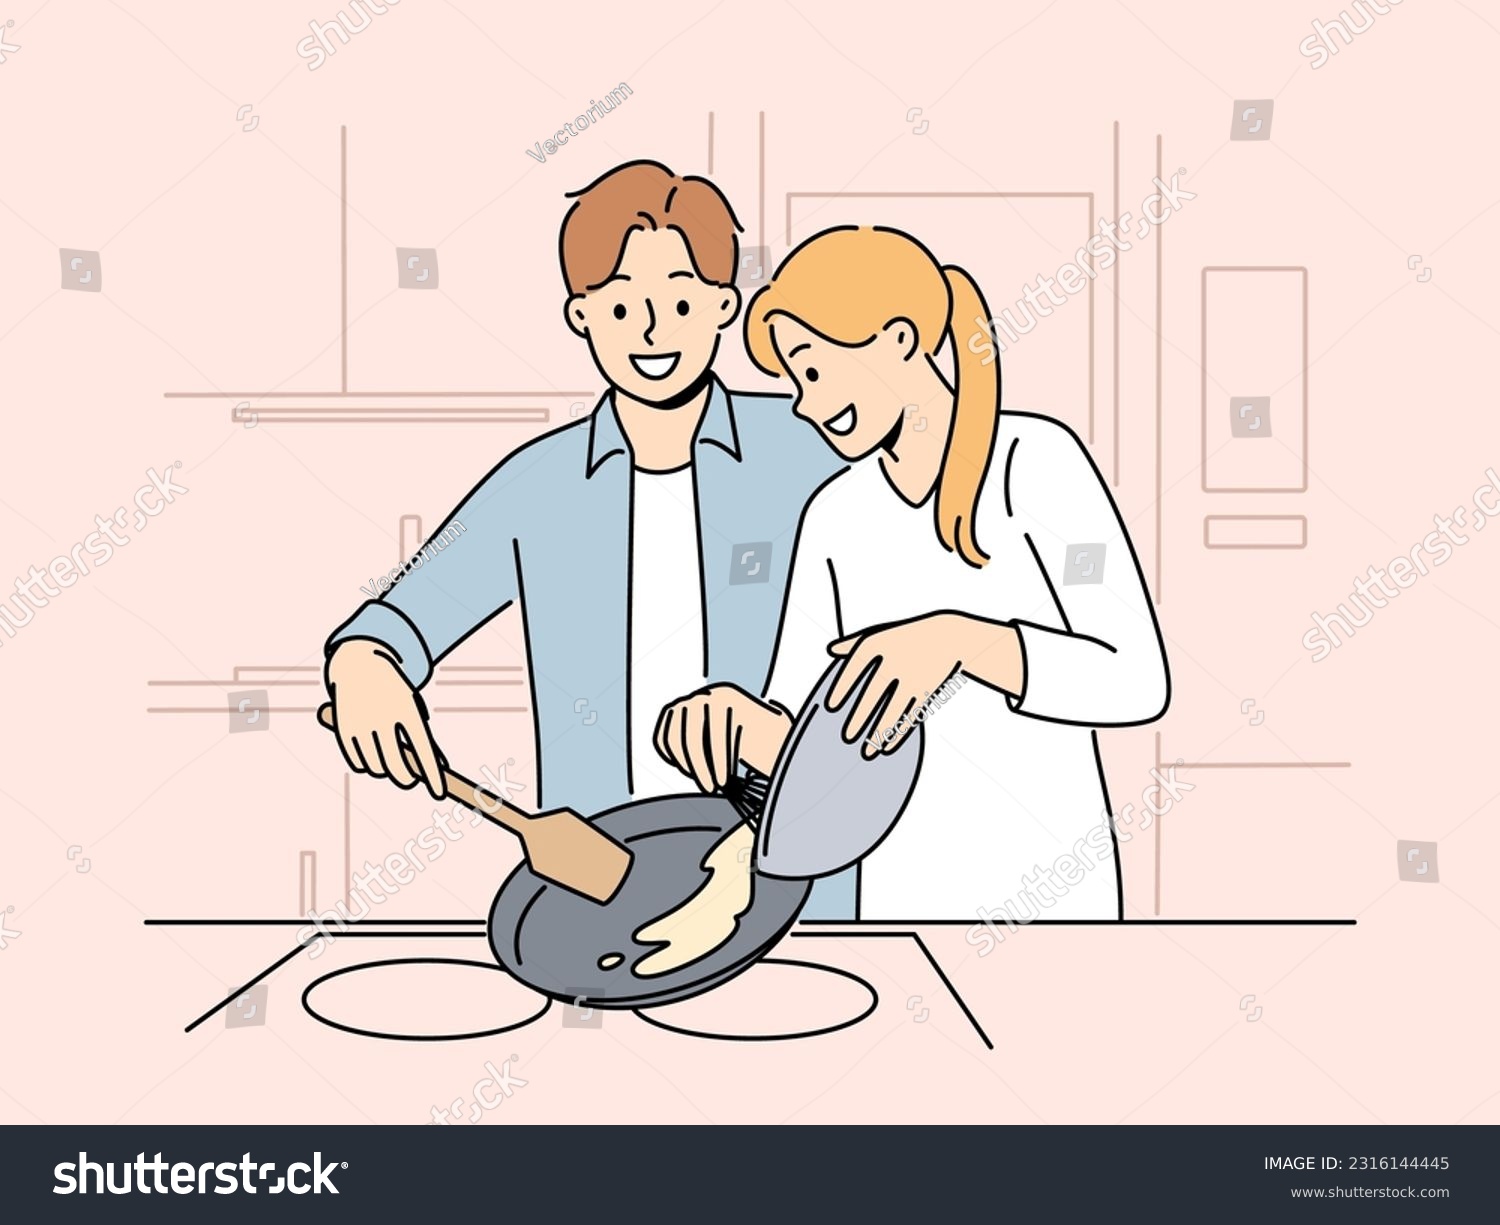 SVG of Married couple prepares breakfast enjoying sunday morning and experiencing happiness from communicating with loved one. Happy couple of man and woman cooking pancakes or omelet together svg